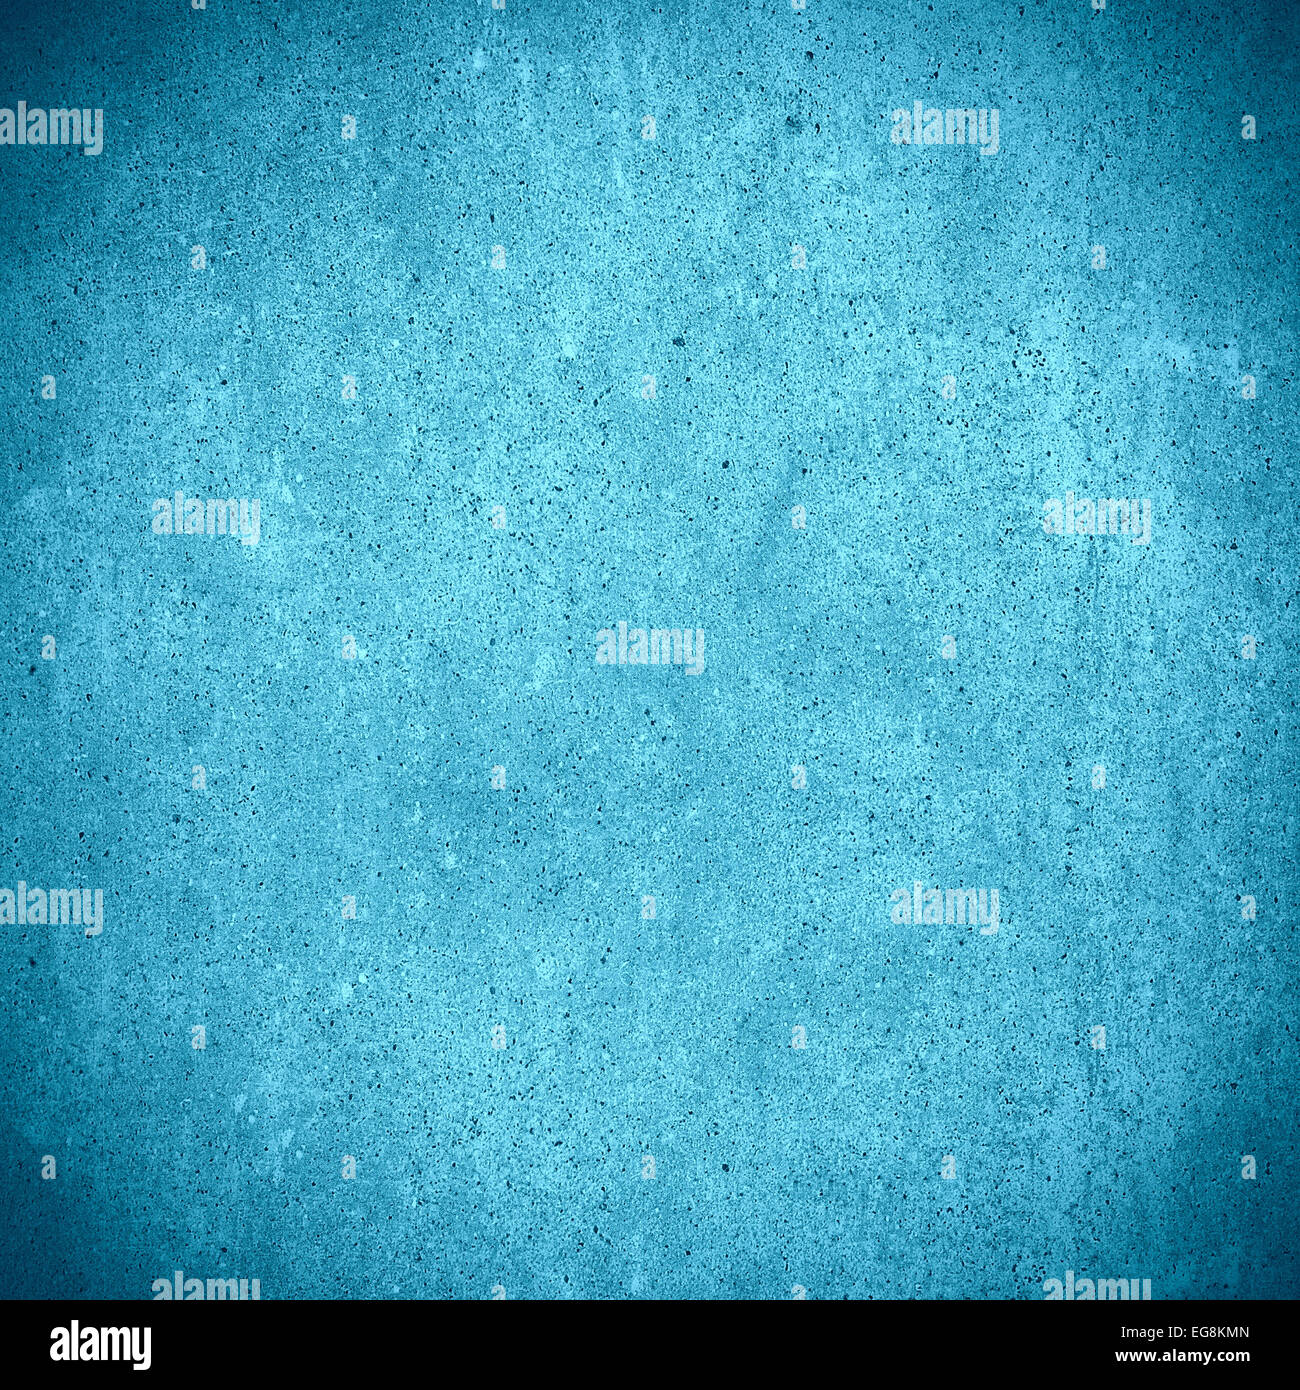 blue abstract background or cement grain pattern texture Stock Photo